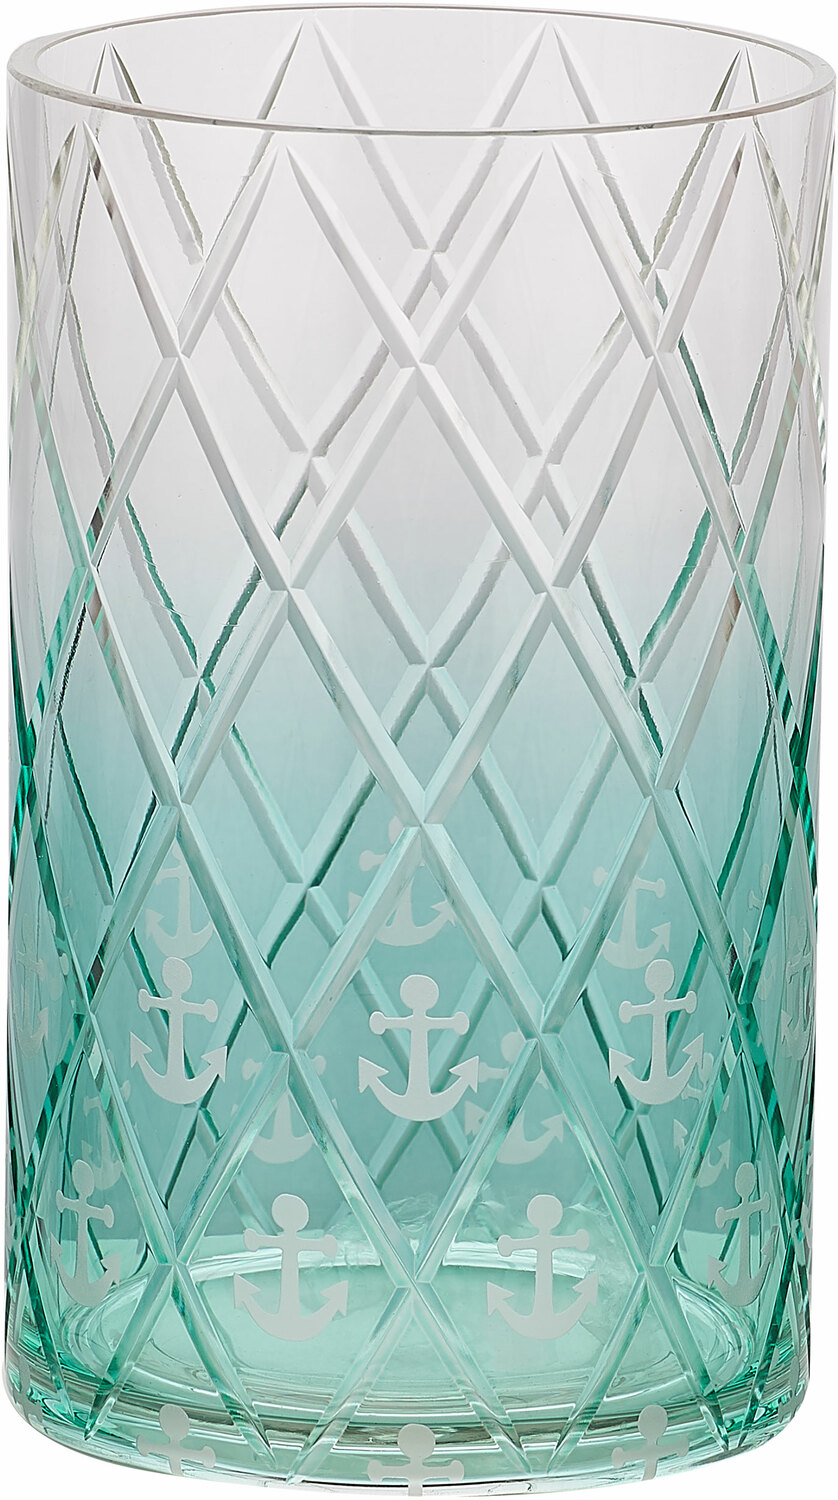 Anchors Away by Candle Decor - Anchors Away - Jar Candle Holder